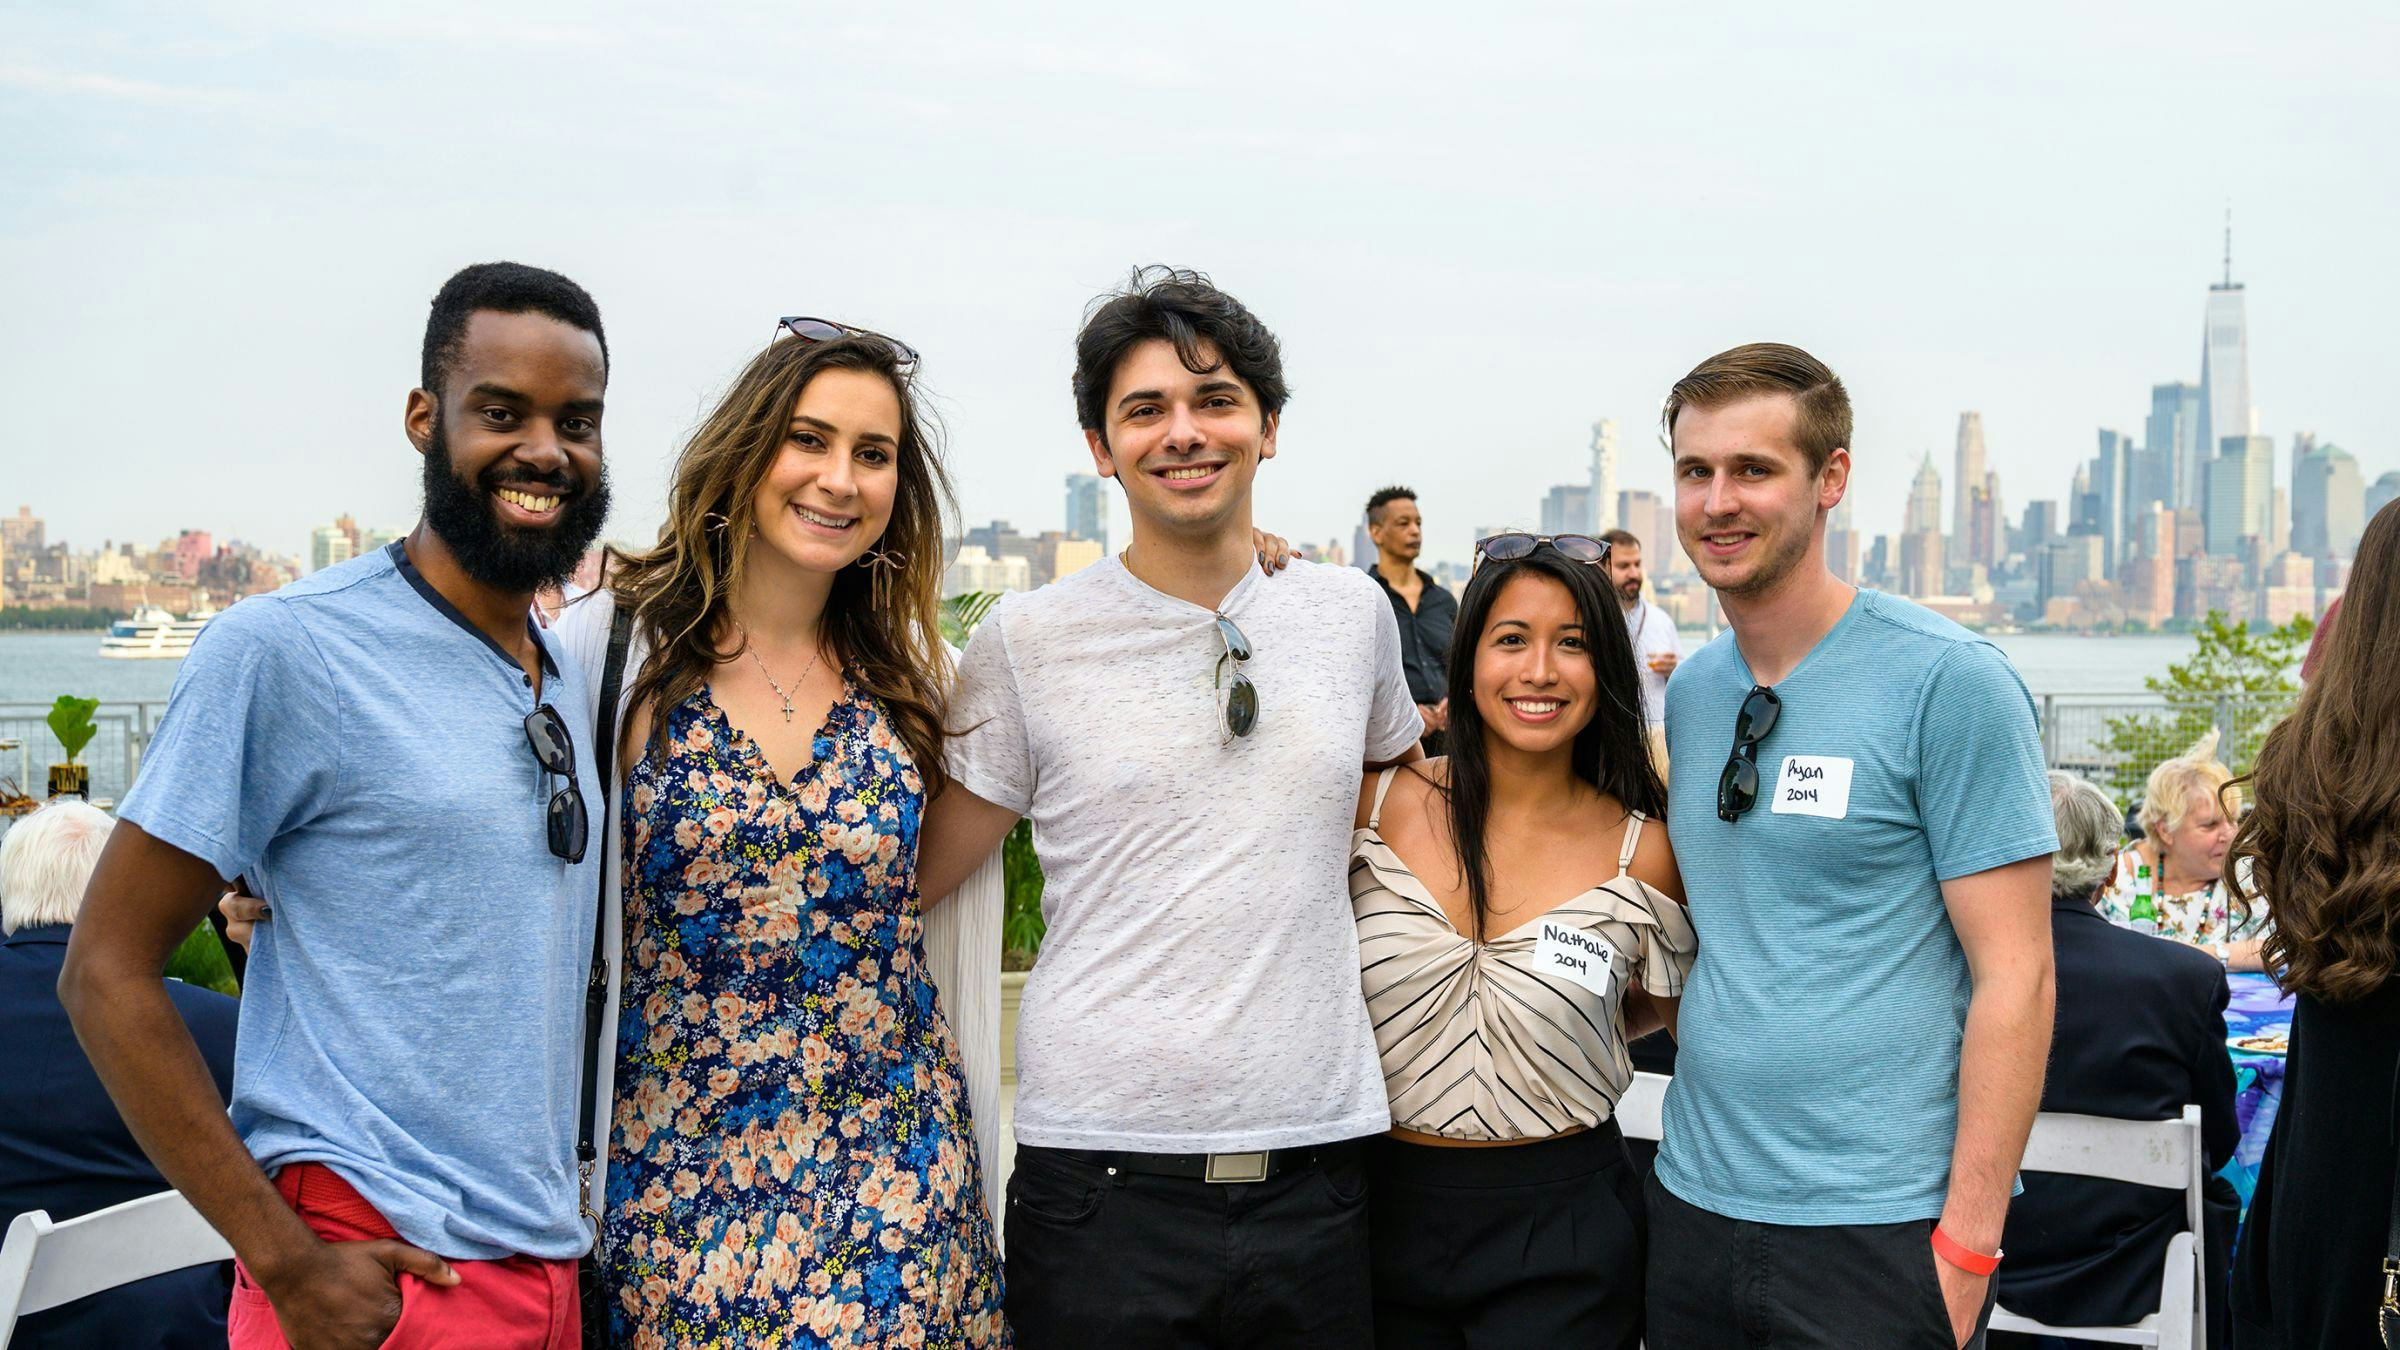 Five Stevens alumni pose for a photo outdoors in front of the New York skyline.